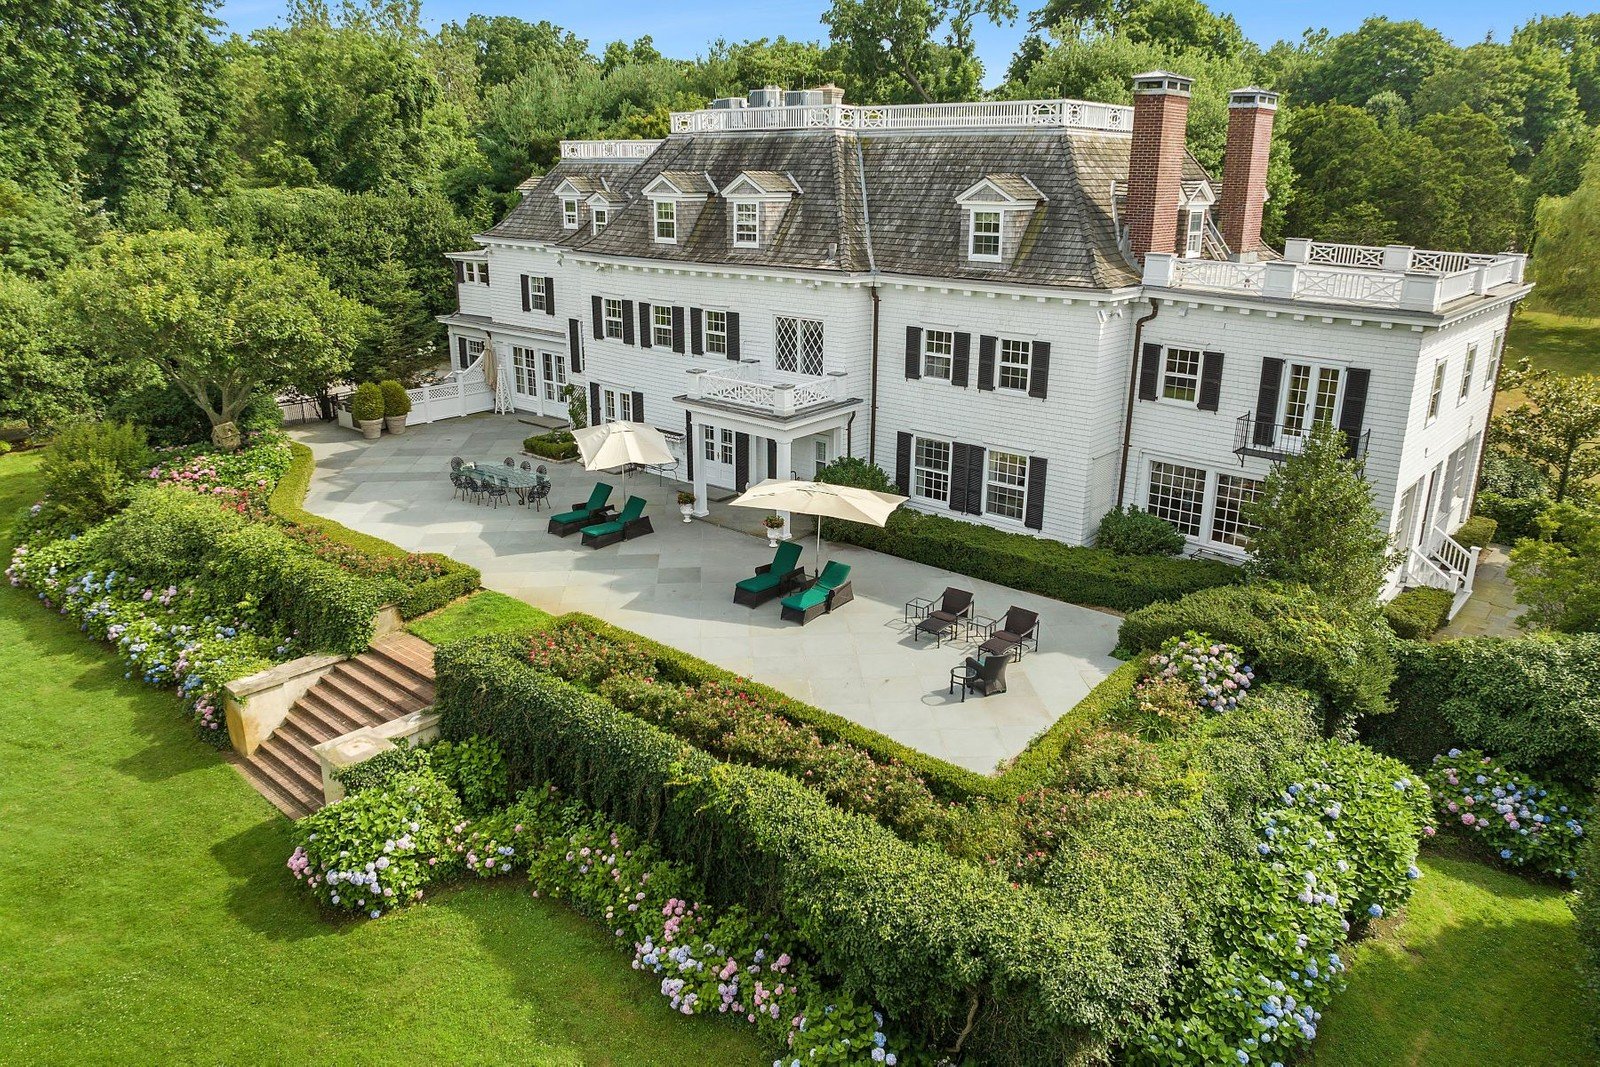 Francis York Daniel Gale Sothebys The Lindens Timeless Long Island Estate Once Home to the Famed Bootleggers, the Vanderbilts, and Rockstars 15.jpeg